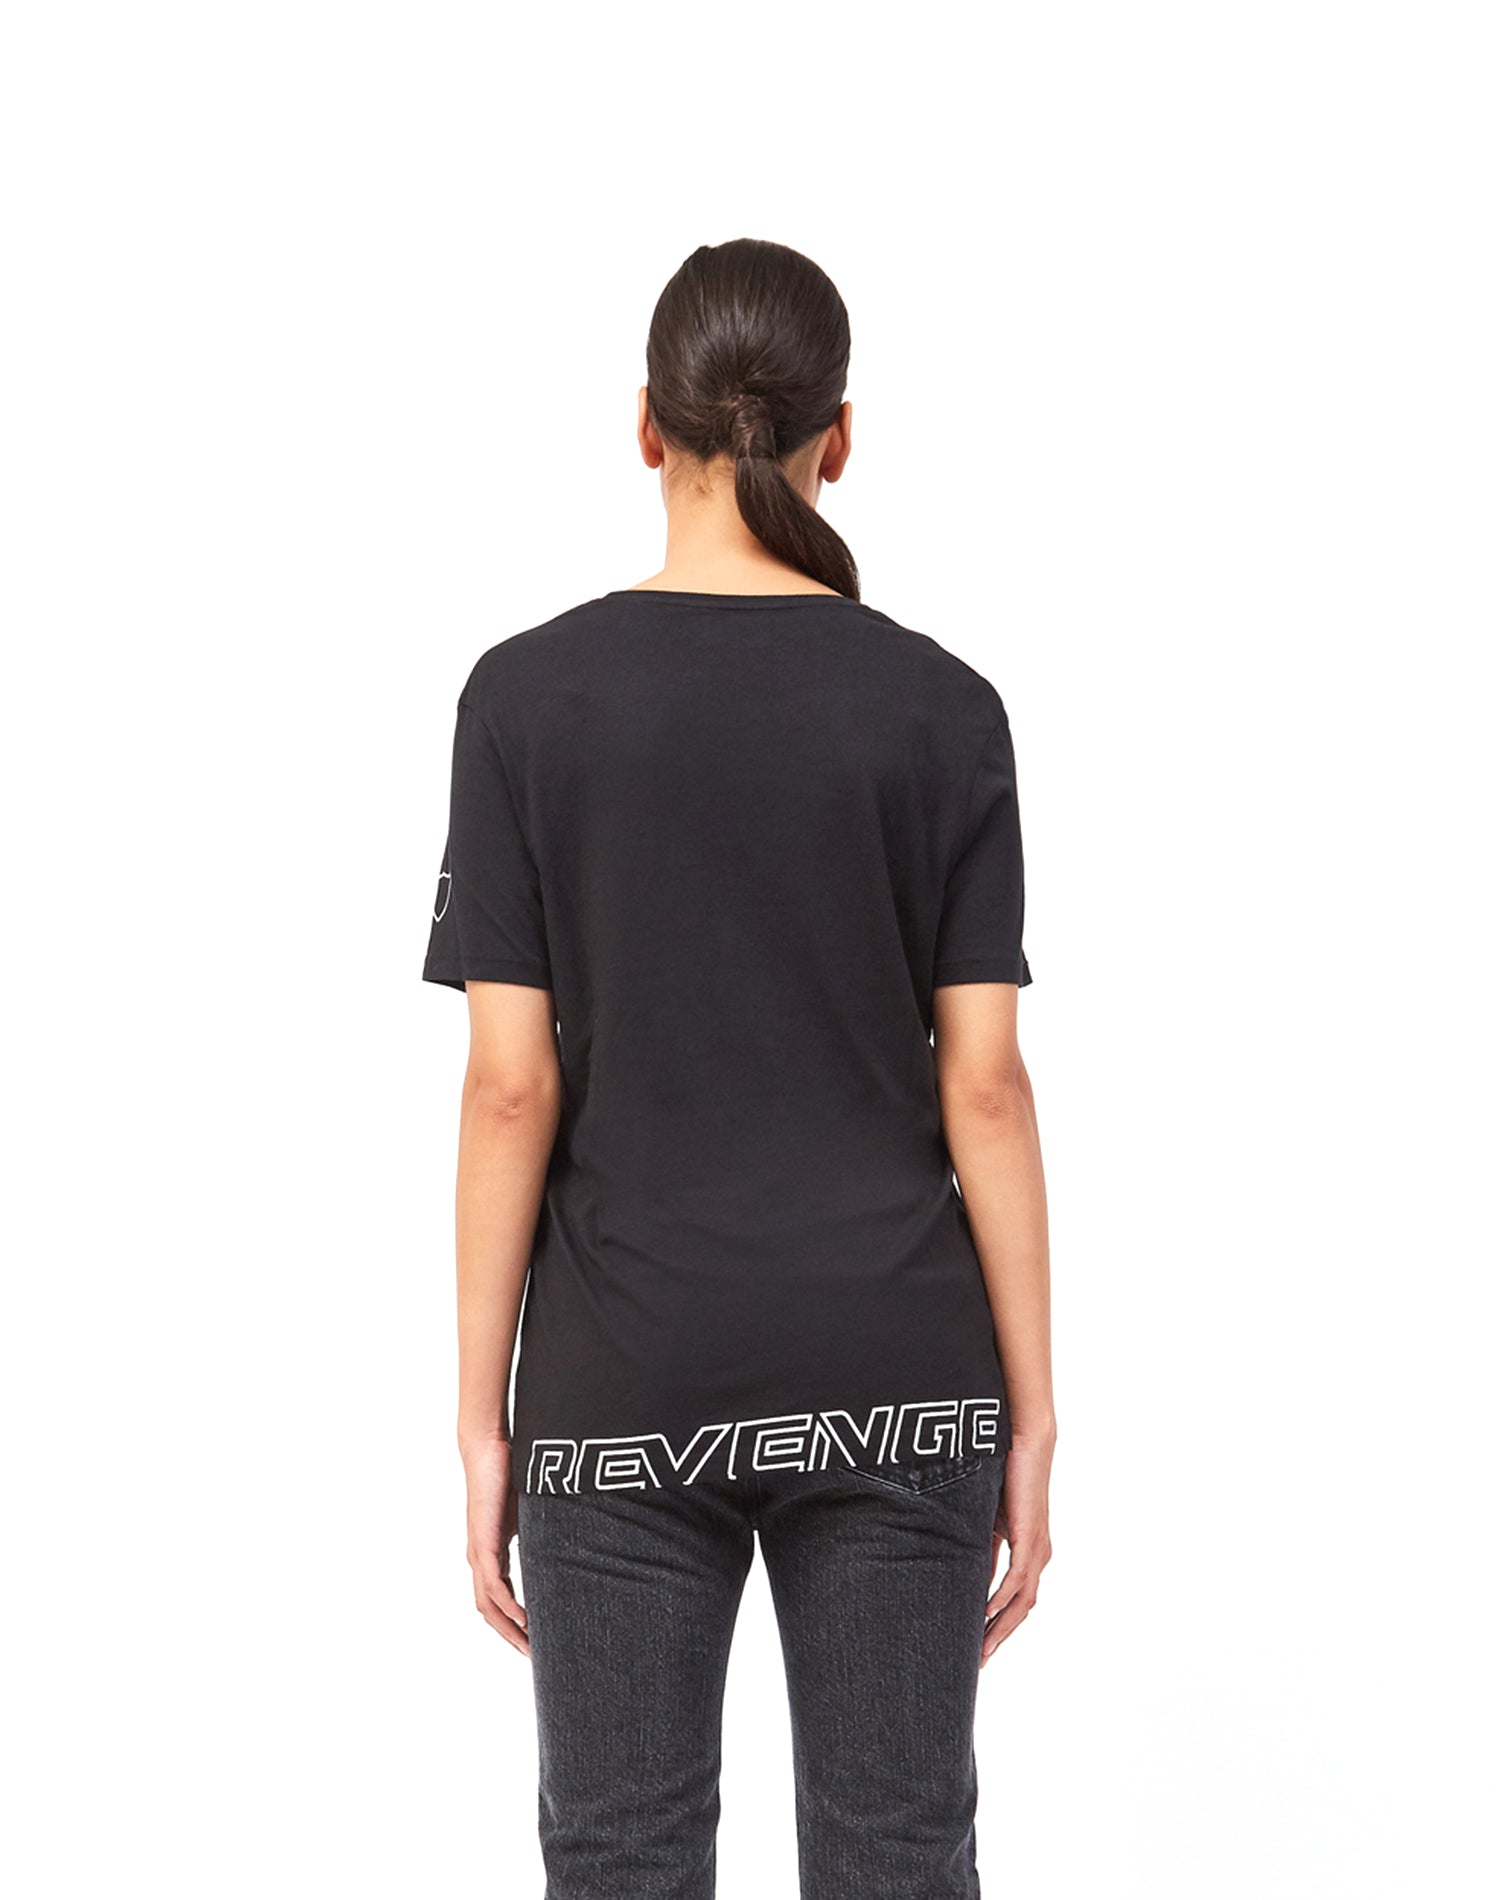 SINNERS T-SHIRT Crew neck black t shirt with frontal , side and back printed details. Side rips on the bottom. 100% cotton. Made in Italy. HTC LOS ANGELES